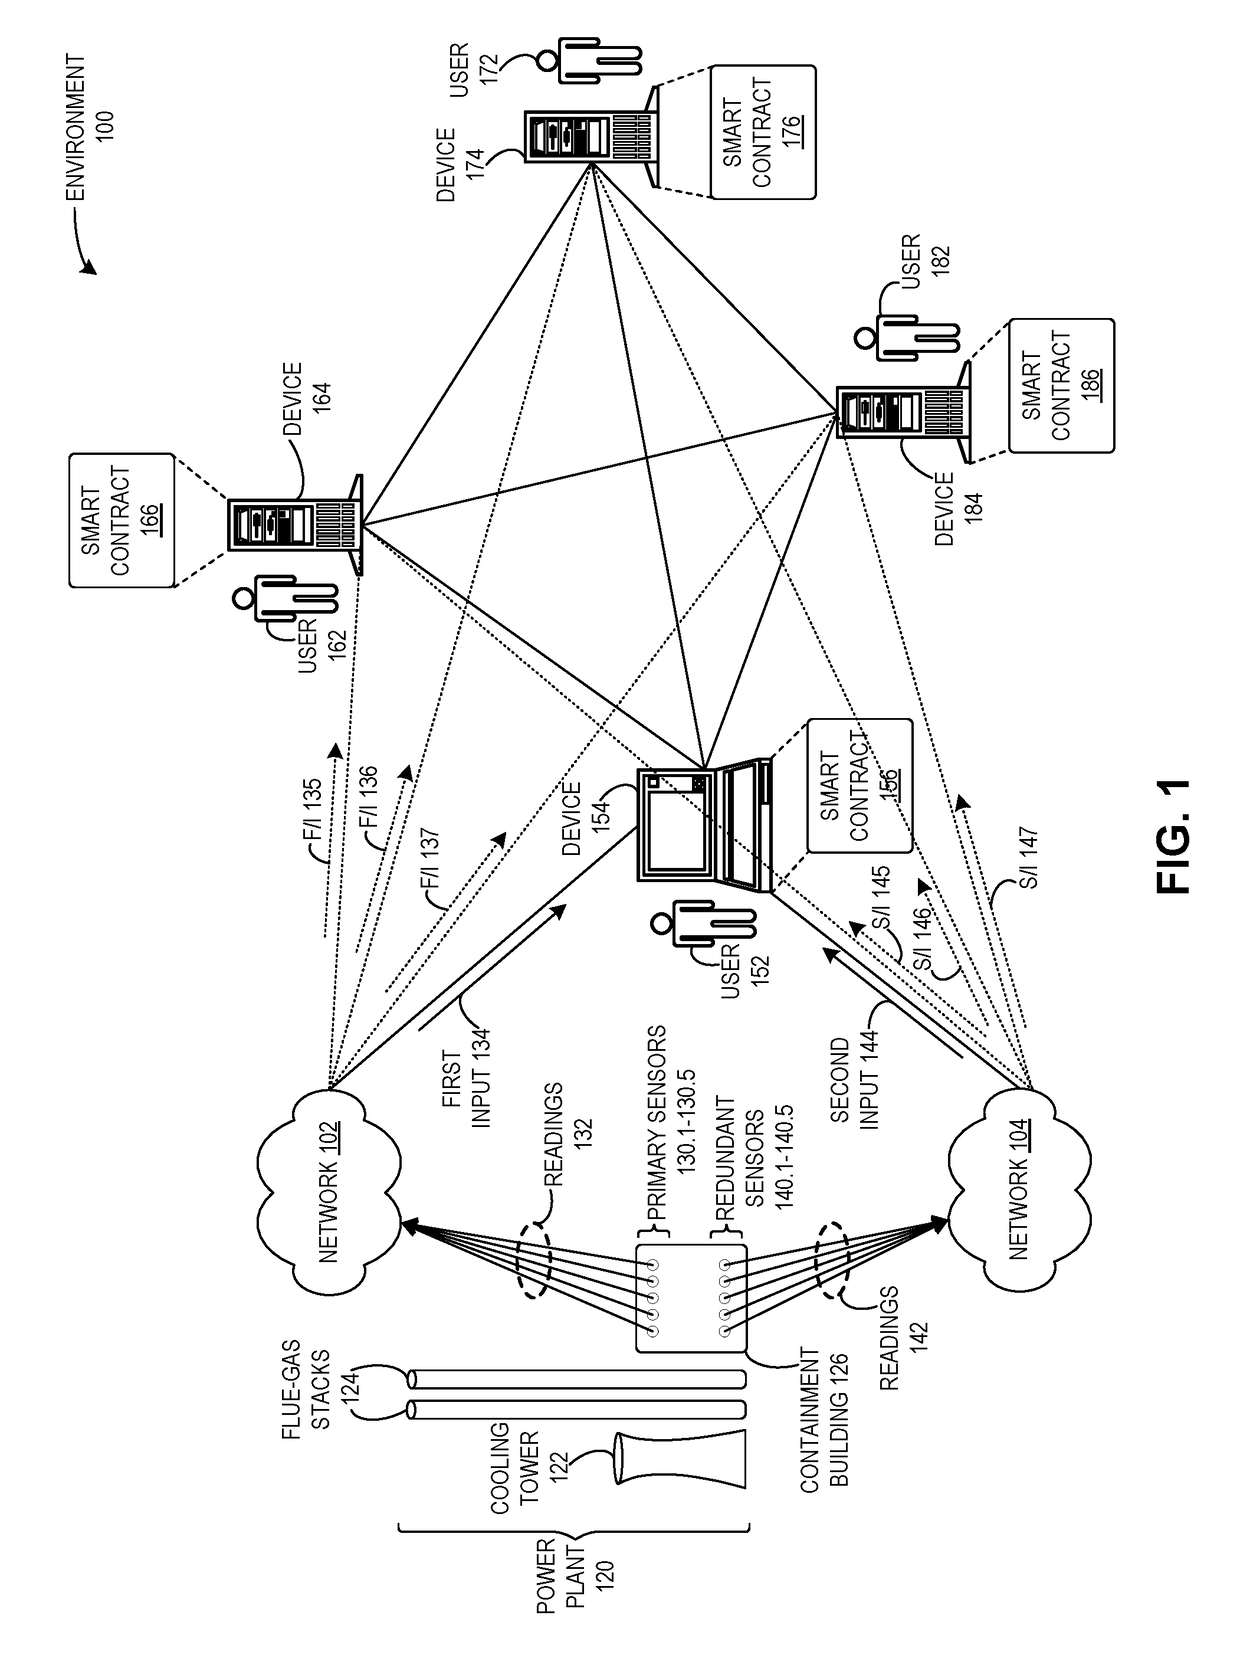 Method and system for detecting attacks on cyber-physical systems using redundant devices and smart contracts